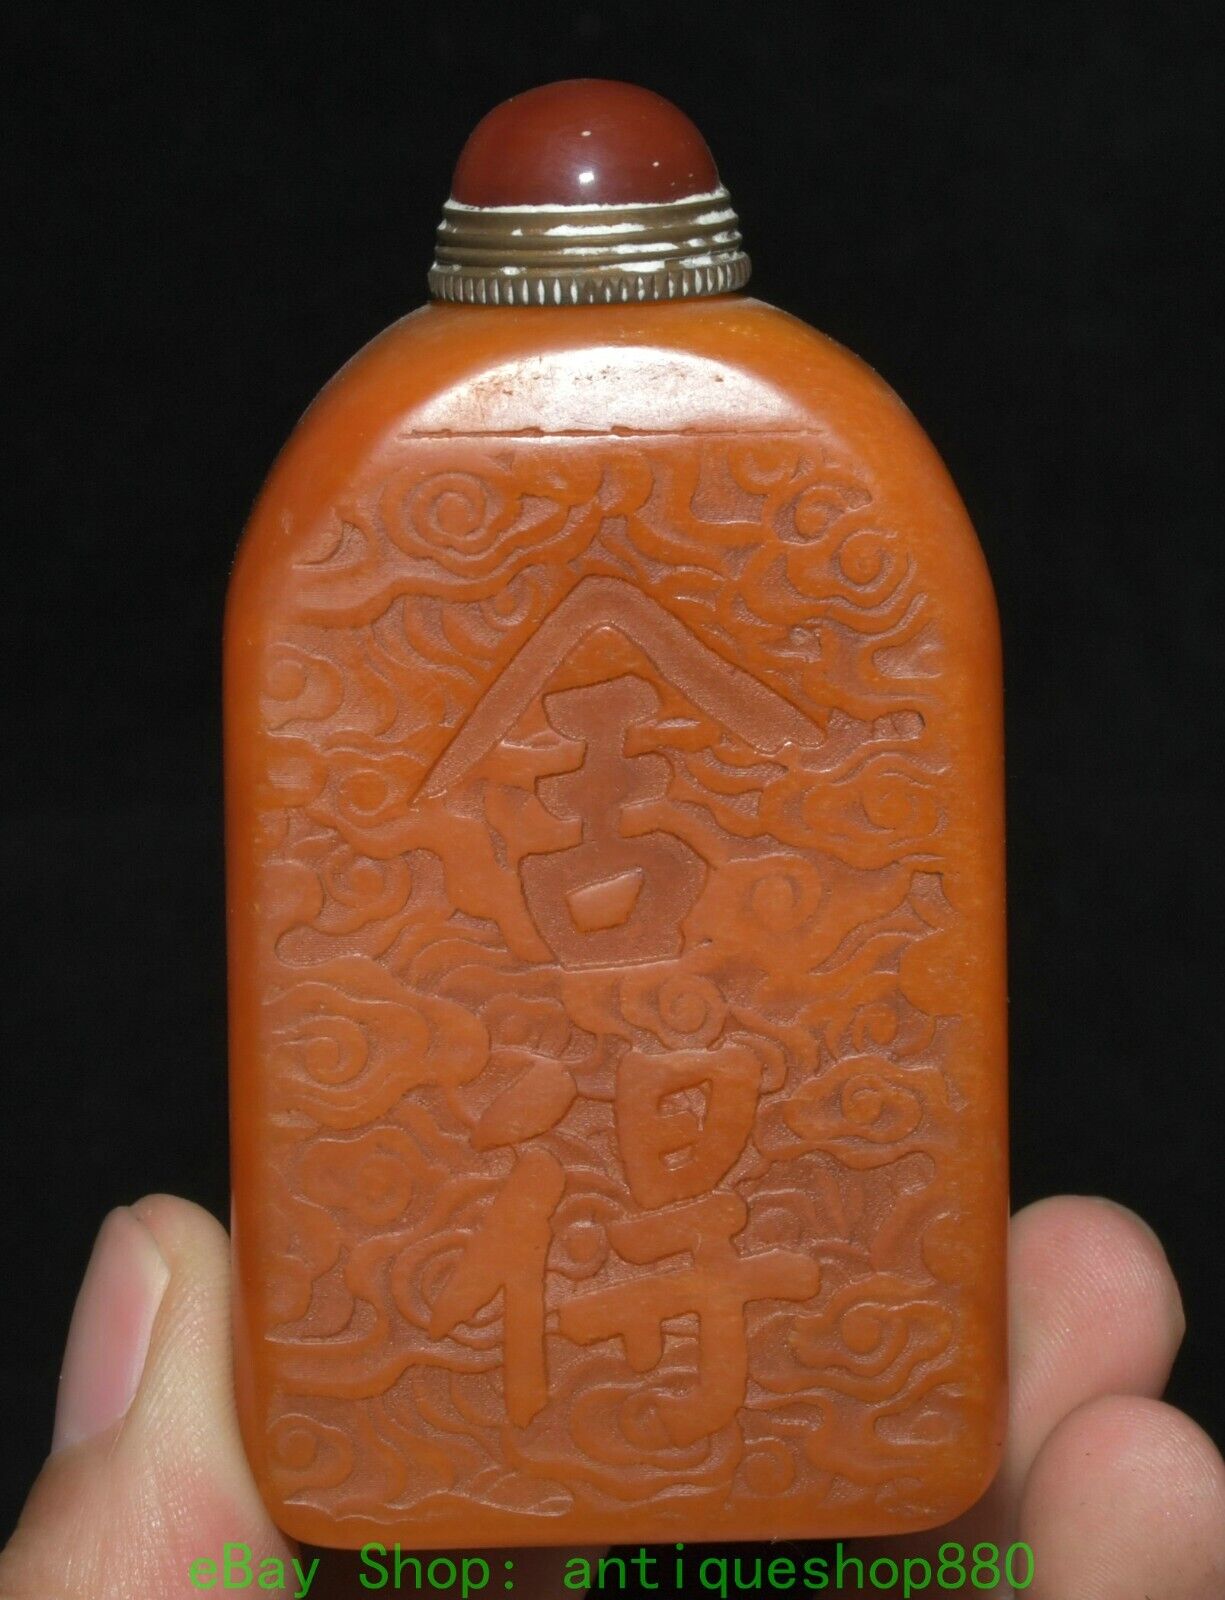 8cm Old Chinese Shoushan Stone Carving “ 舍得 ”arhat Rohan Snuff Bottle Statue